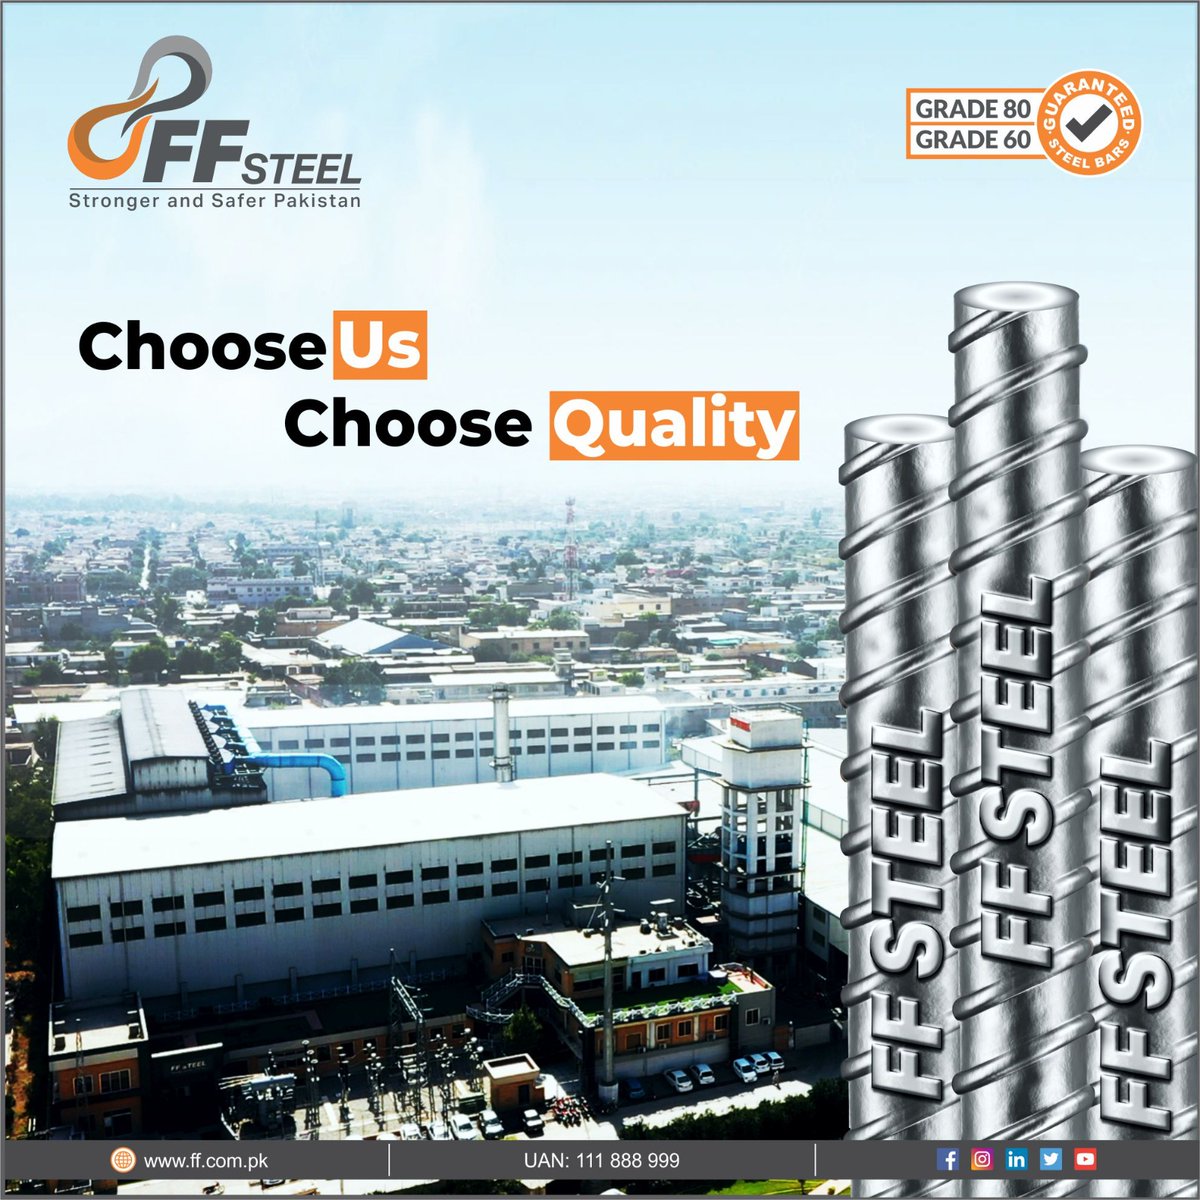 Introducing FF Steel - Where Quality Meets Excellence!

We're crafting a legacy of durability, precision, and quality. If you're on the lookout for the very best in the world of steel, then look no further. Choose Us, Choose Quality.

#FFSteel #StrongerAndSafer #Grade60 #Grade80